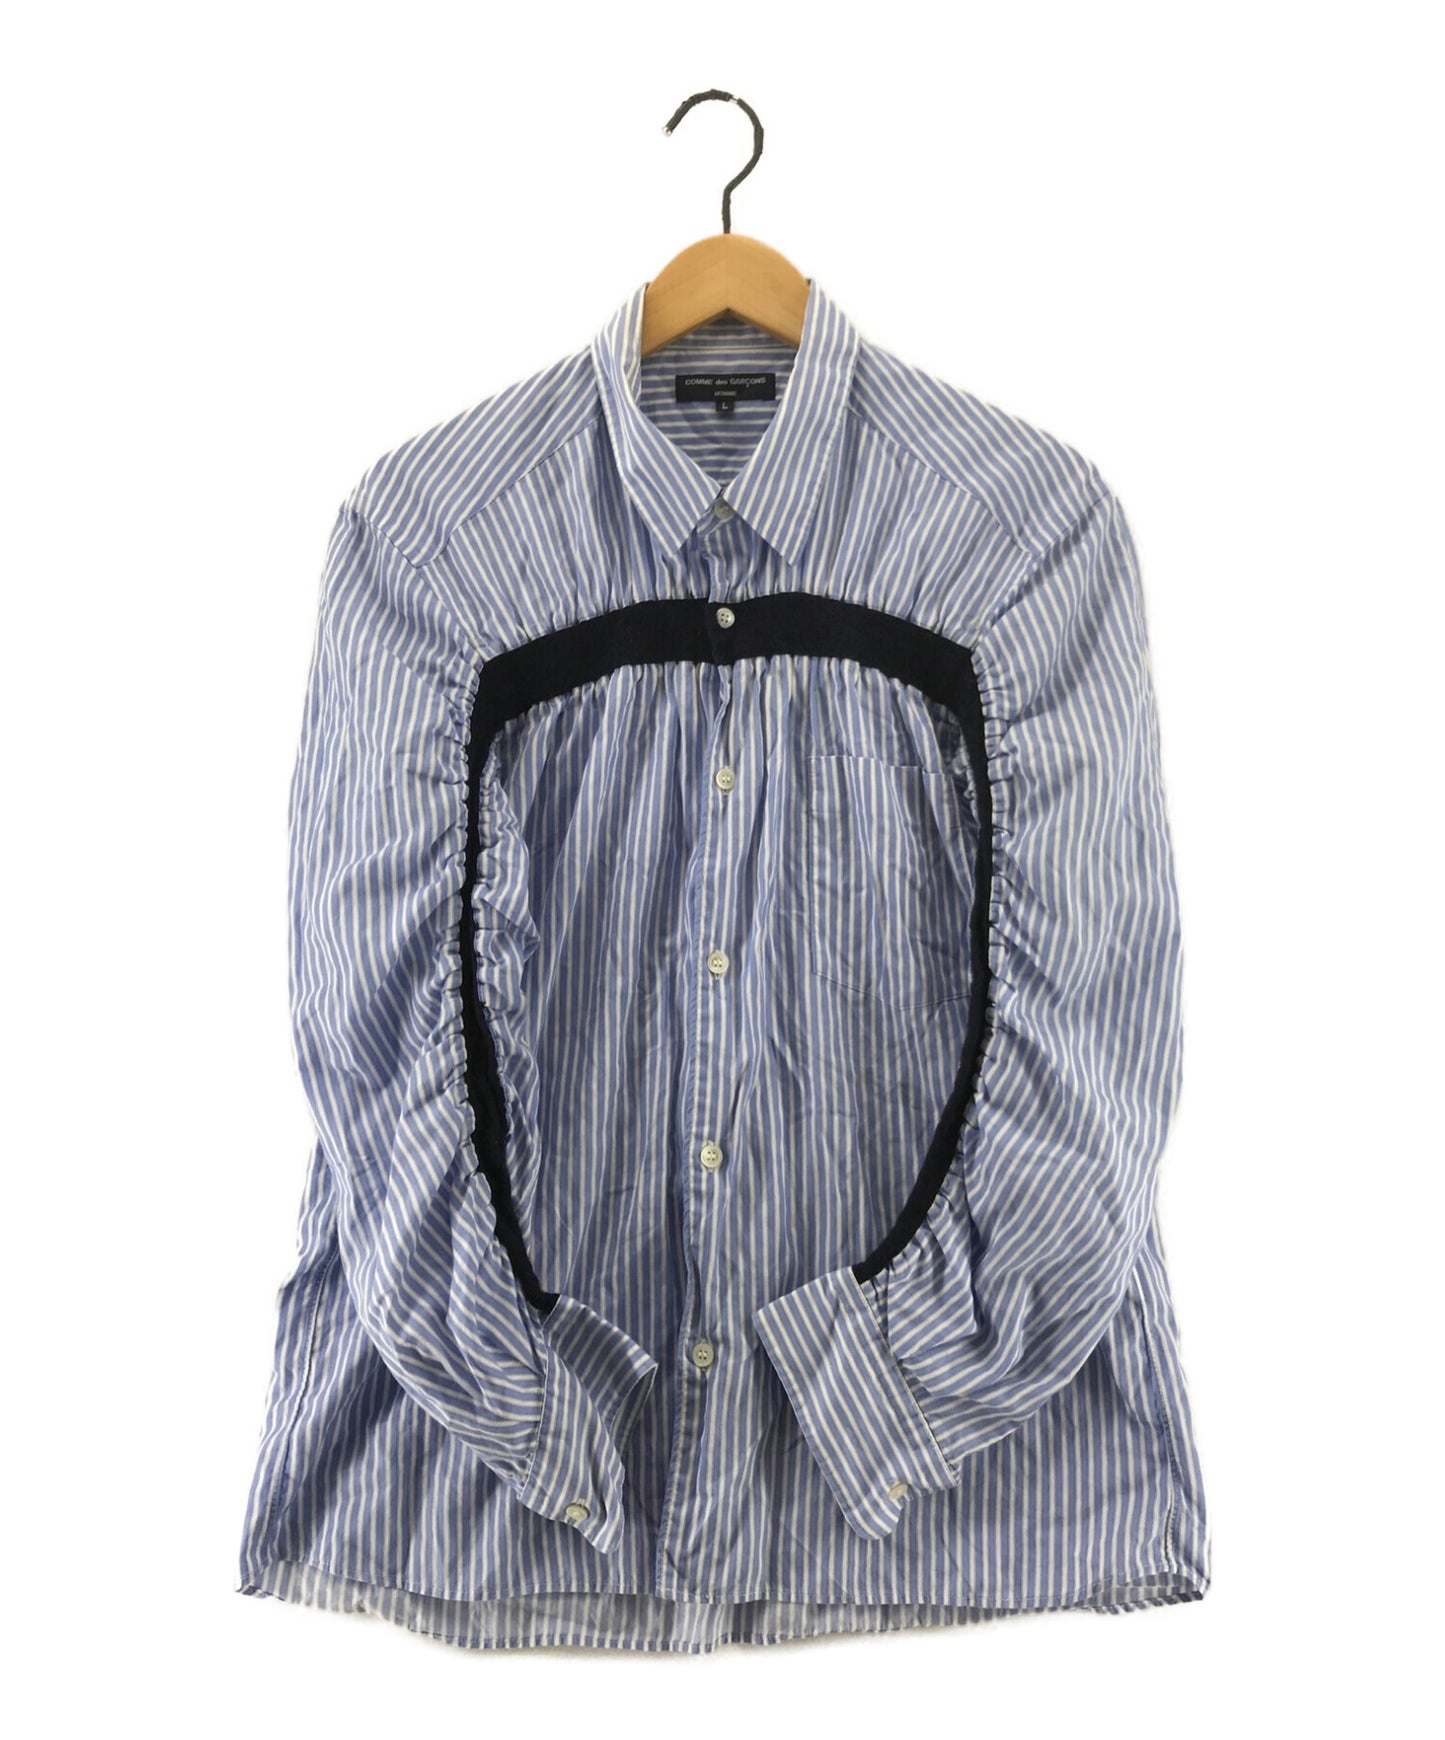 COMME des GARCONS HOMME Wool Switching Packing Stripe Shirt HH-B028